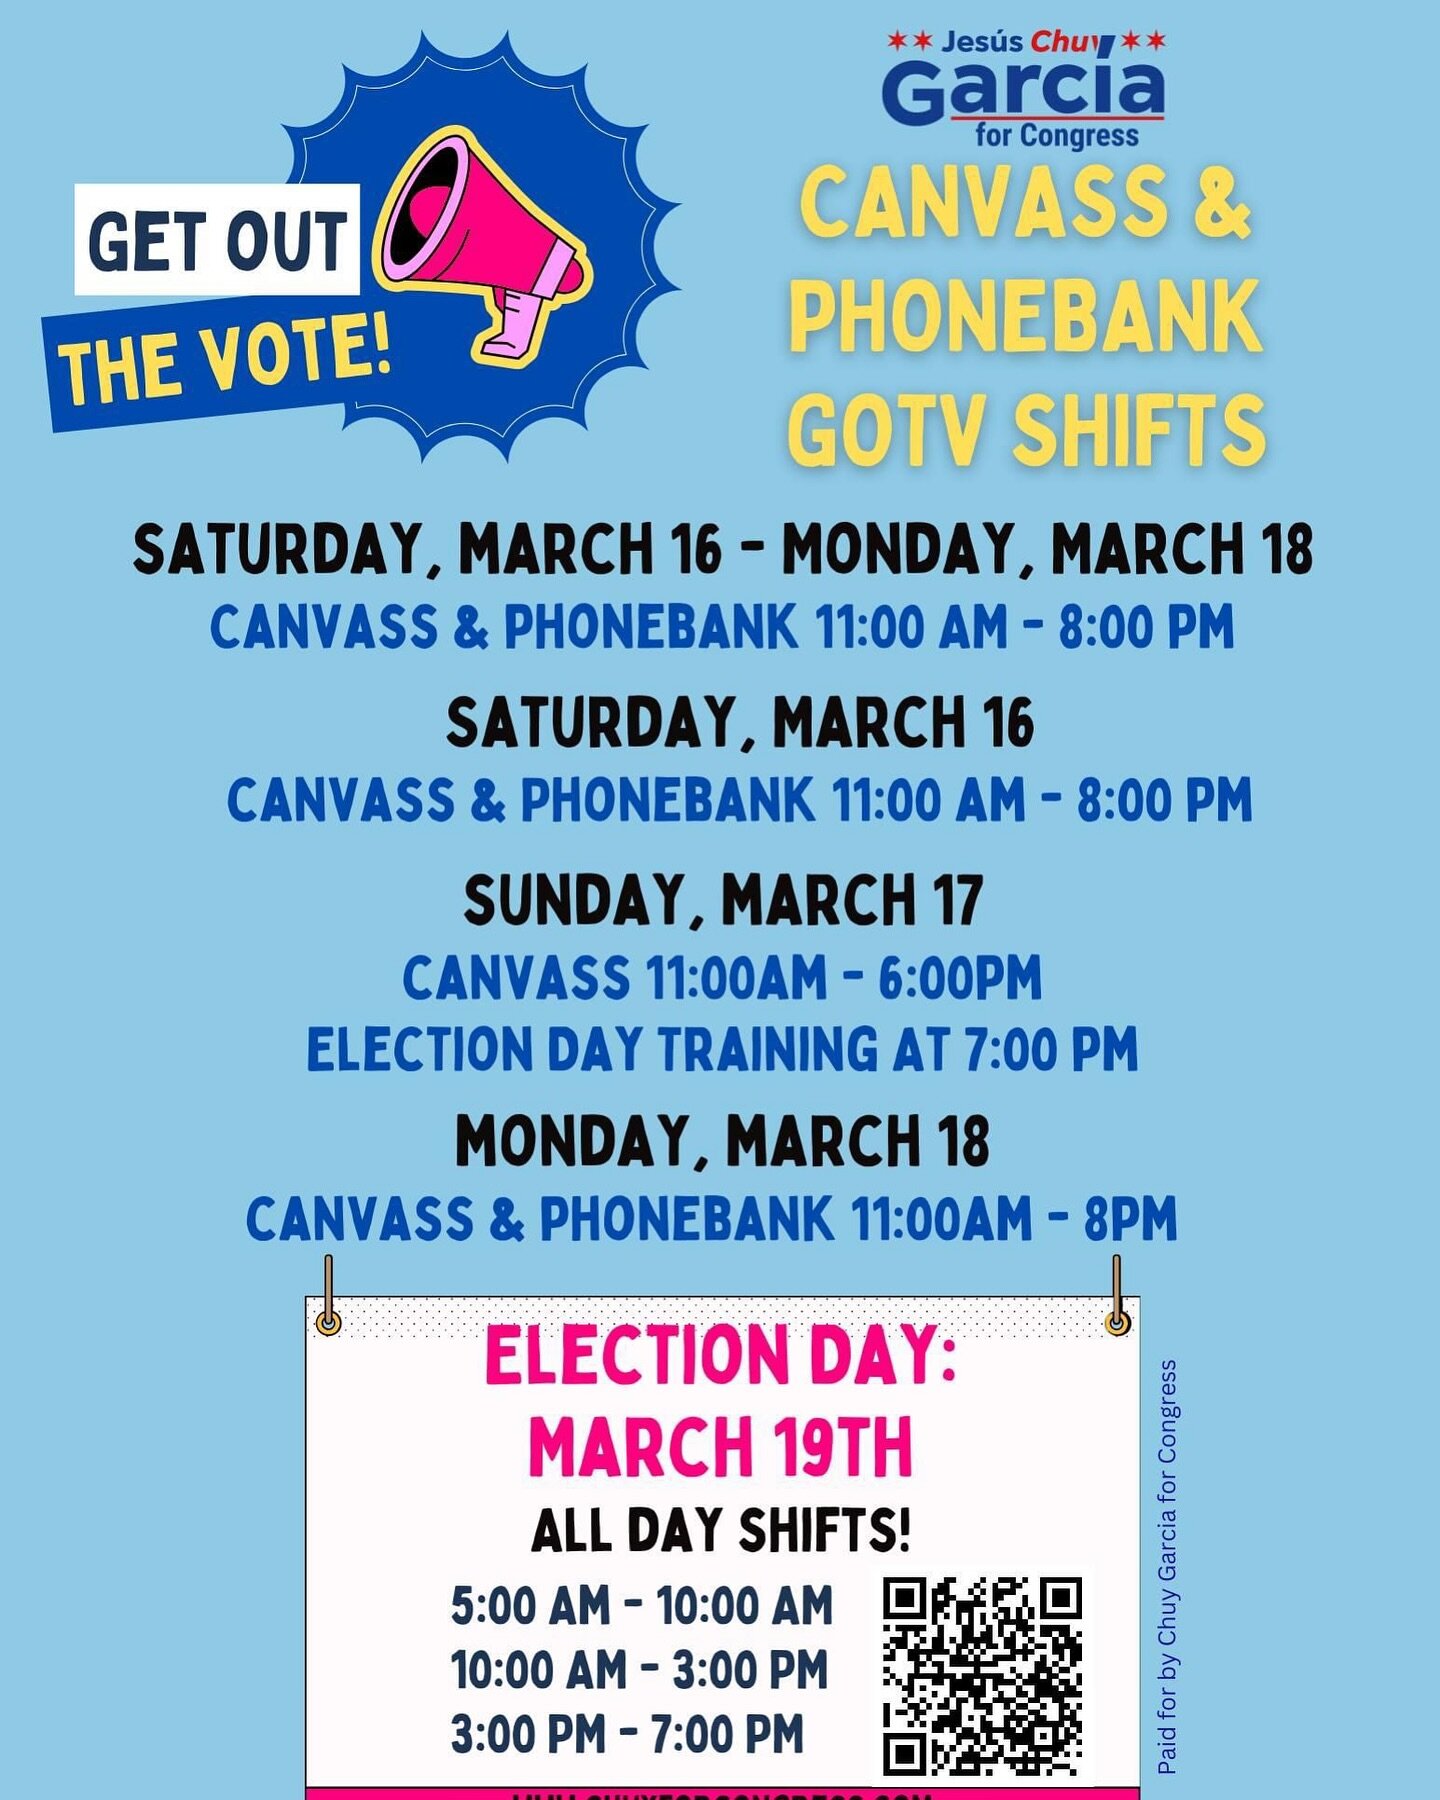 Let&rsquo;s GOTV 4th Congressional District! We&rsquo;re two days away from the Illinois&rsquo; Primary Election and need your help getting us to the finish line. There are opportunities to connect with voters every day, register below: 

&iexcl;Tiem